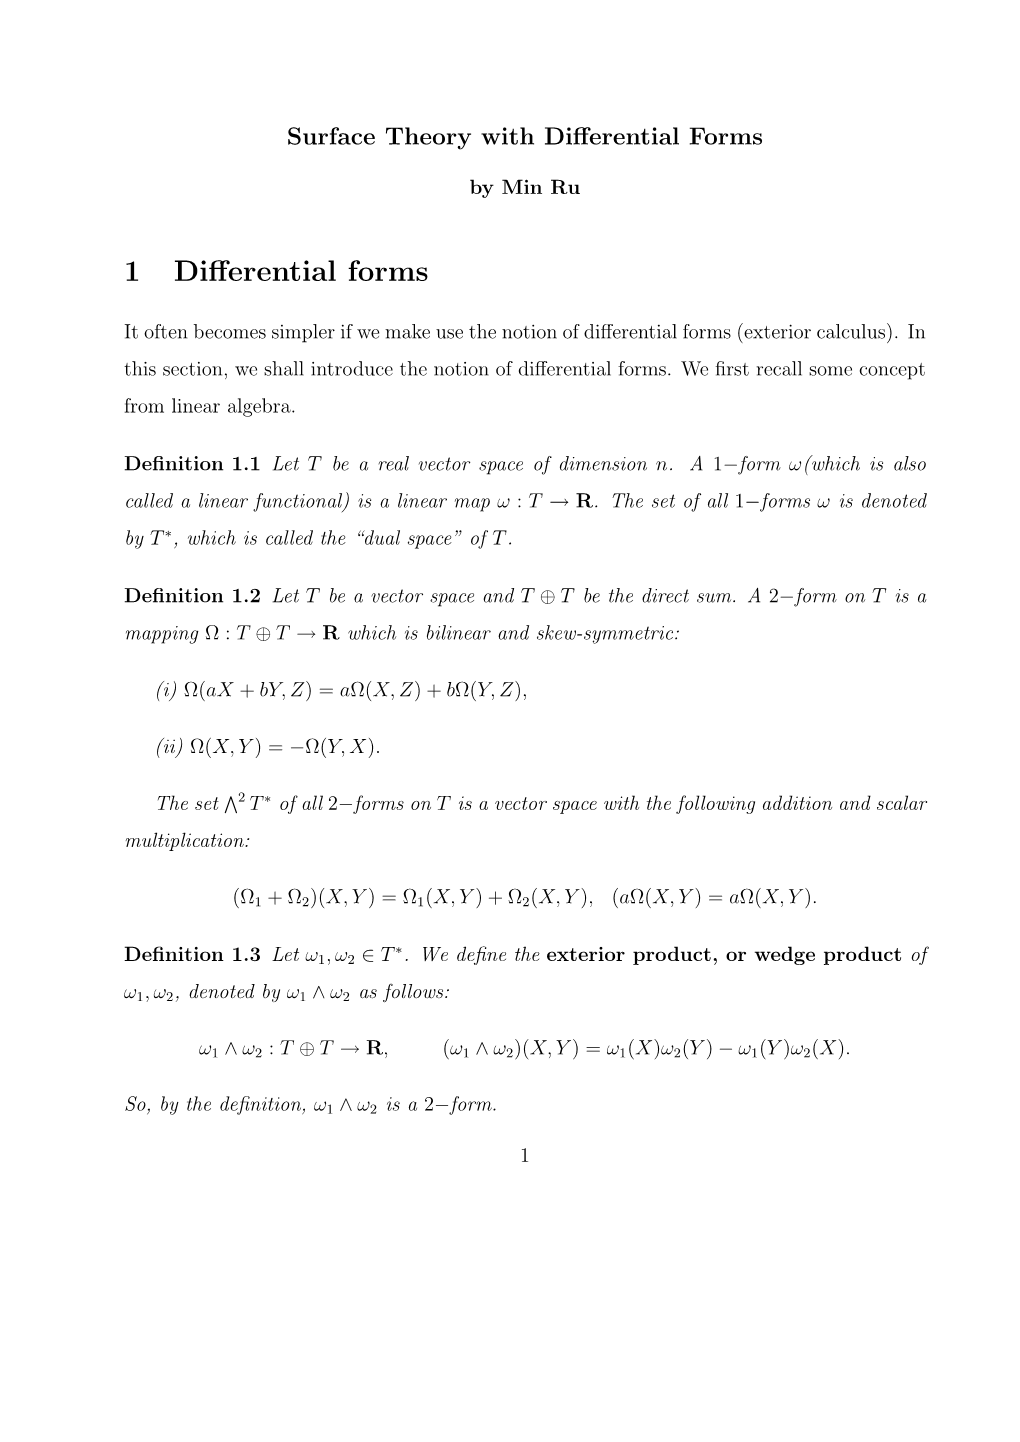 1 Differential Forms